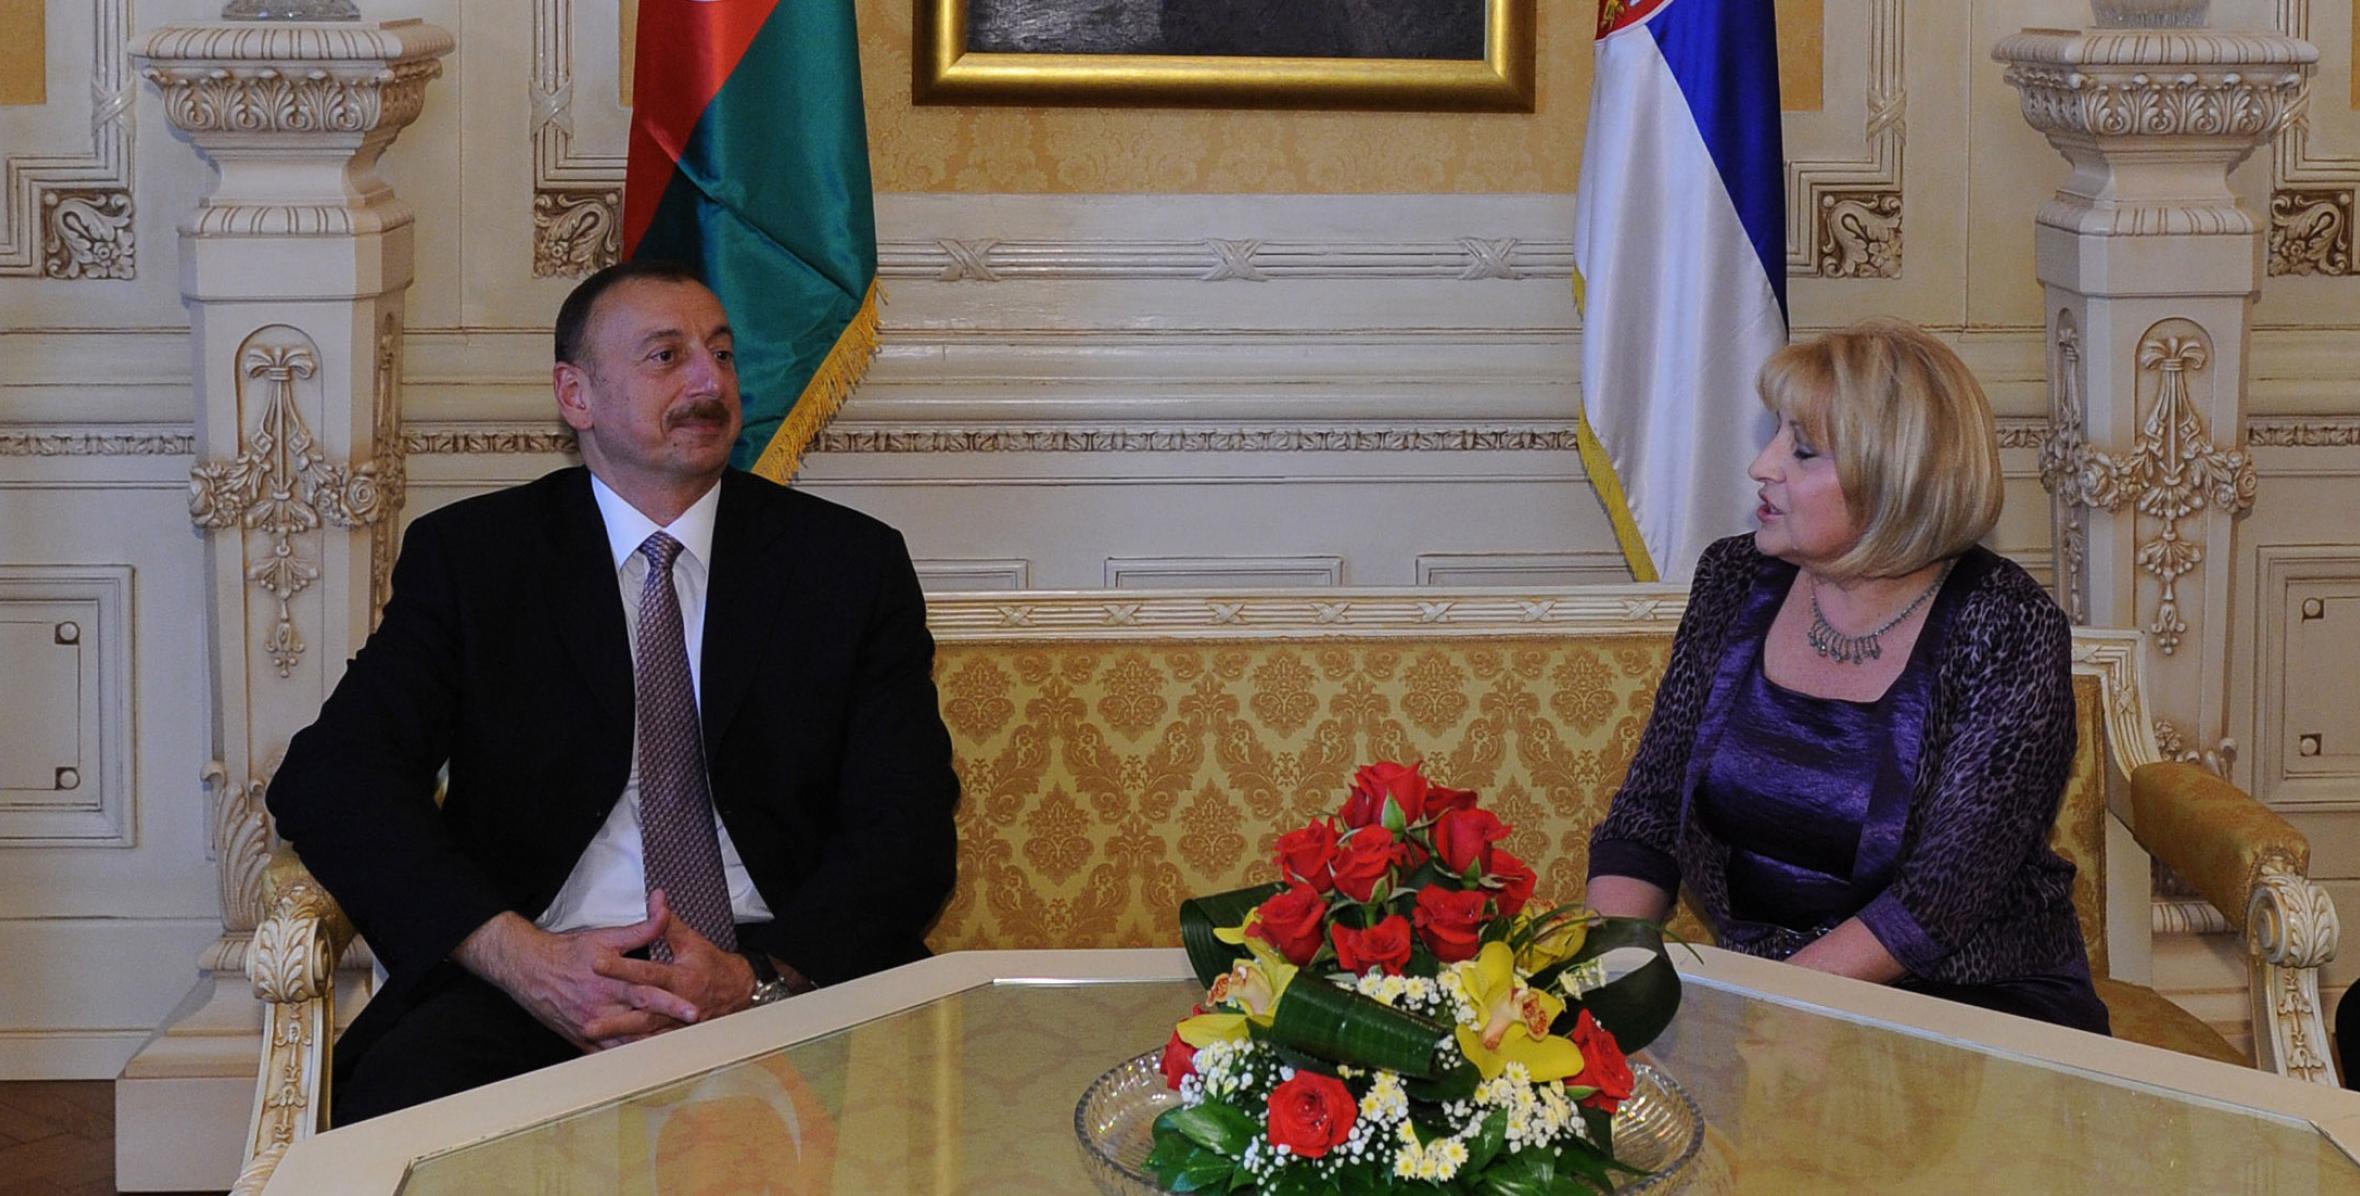 Ilham Aliyev met with President of the National Assembly of the Republic of Serbia Slavica Dukic Dejanovic